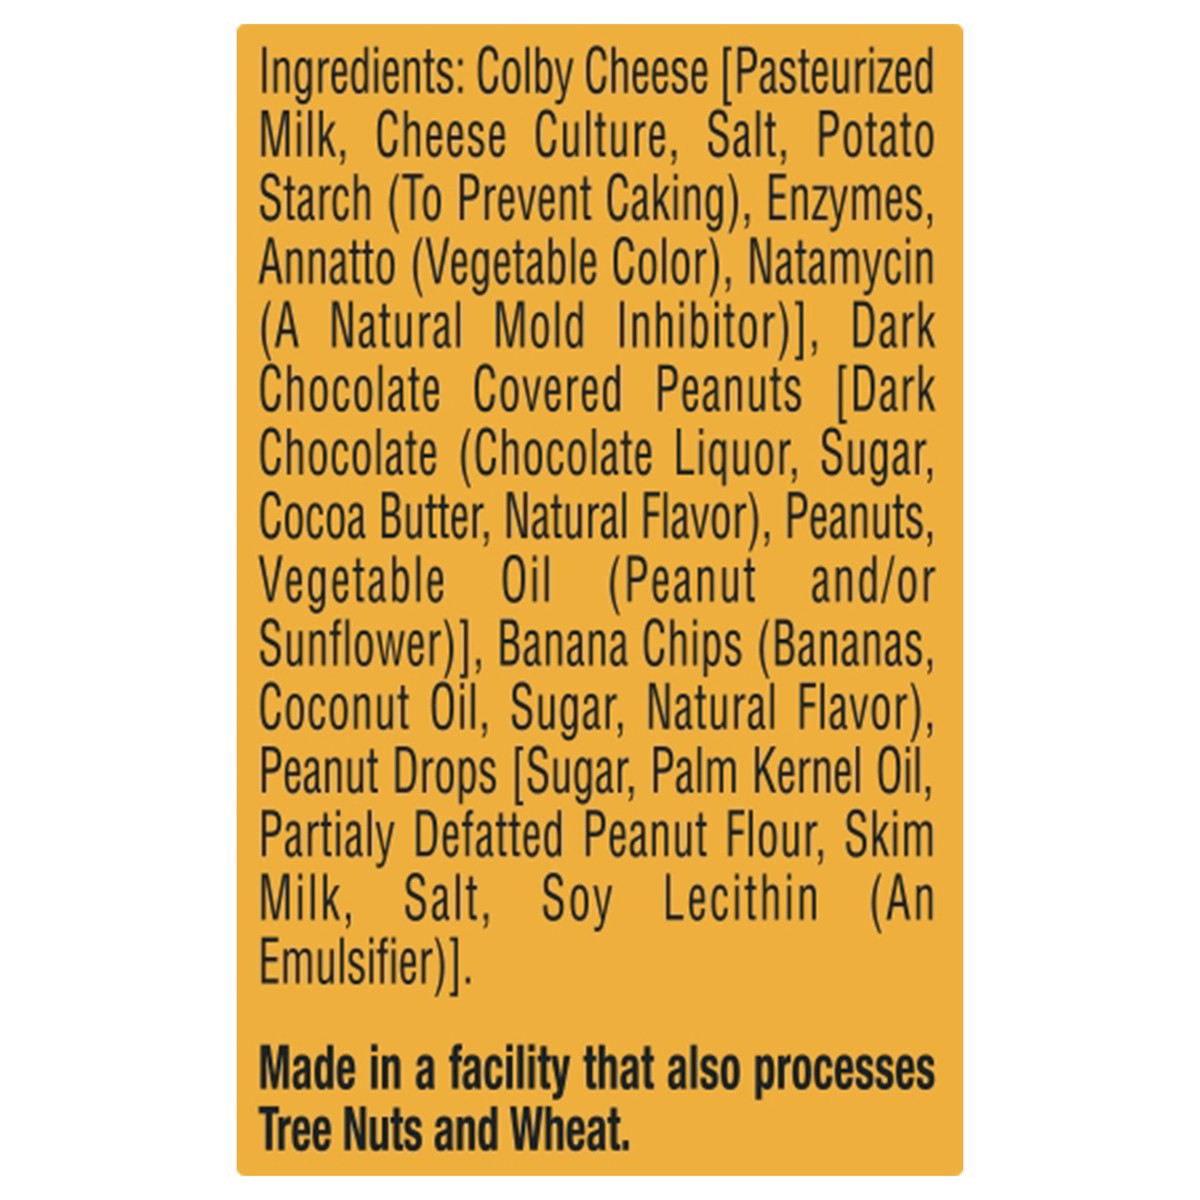 slide 2 of 17, Sargento Sweet Balanced Breaks with Colby Natural Cheese, Dark Chocolate Covered Peanuts, Banana Chips and Creamy Peanut Drops, 1.5 oz., 3-Pack, 4.5 oz